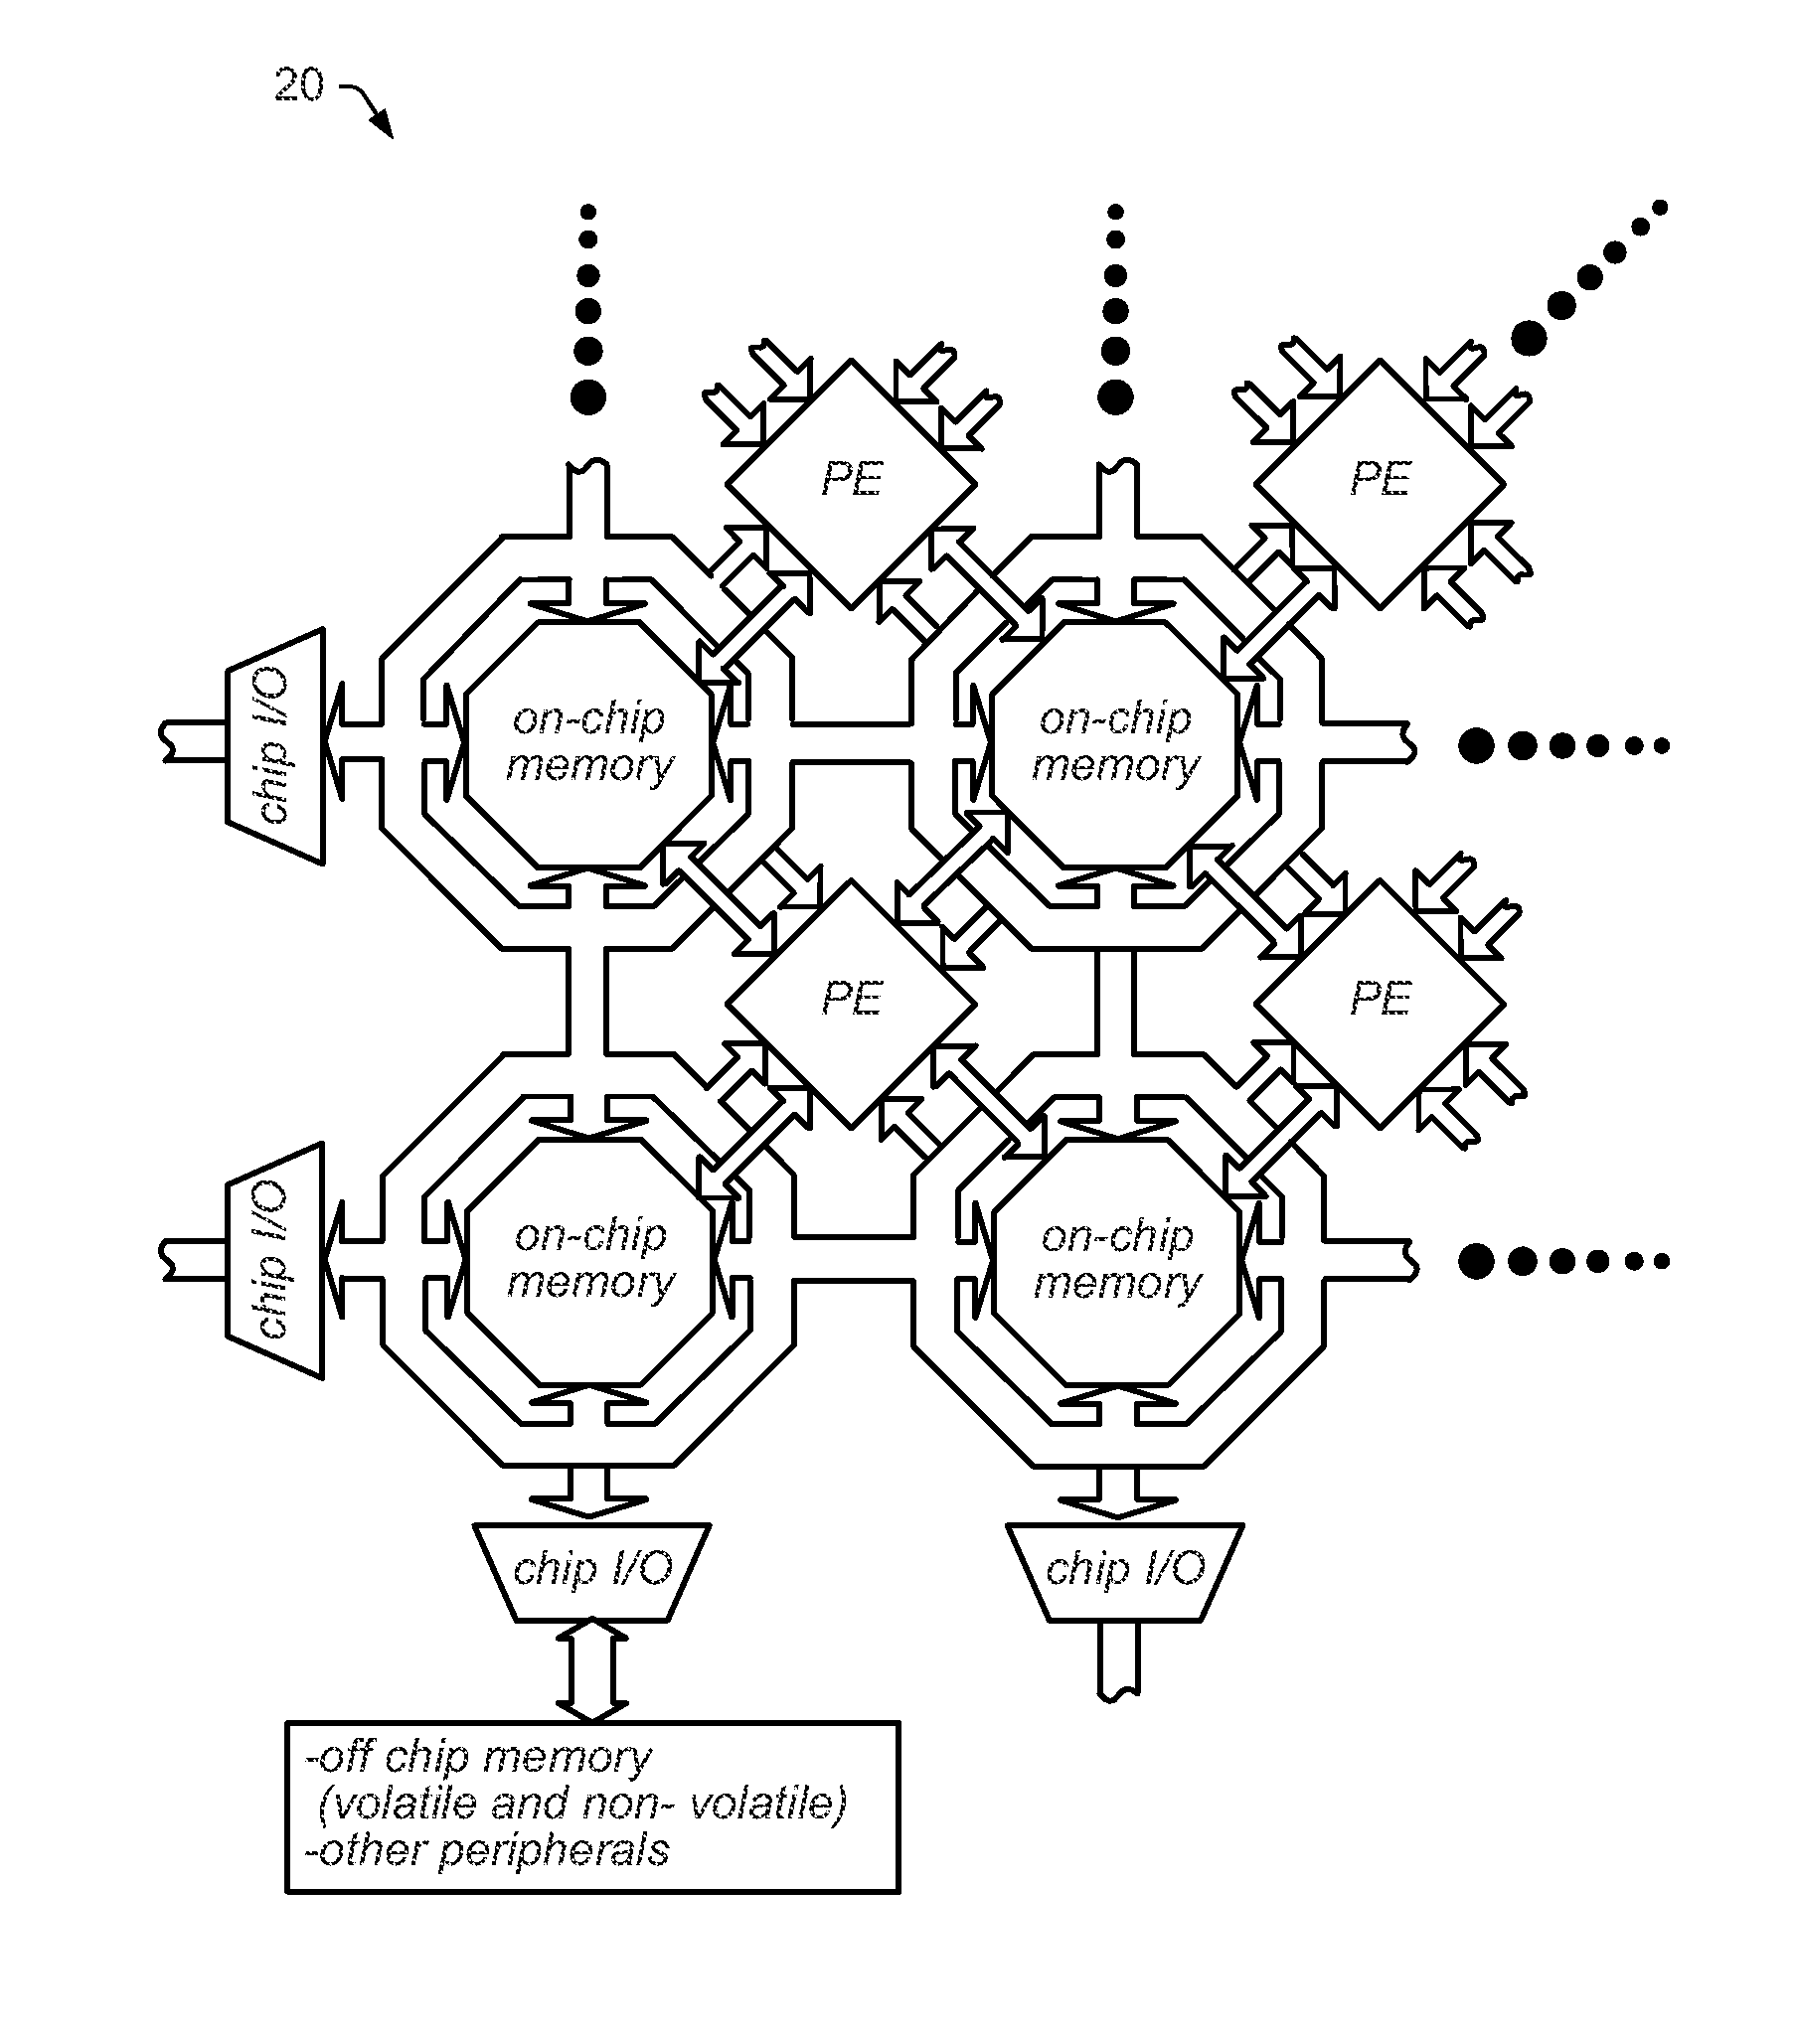 Processing system with interspersed processors DMA-FIFO